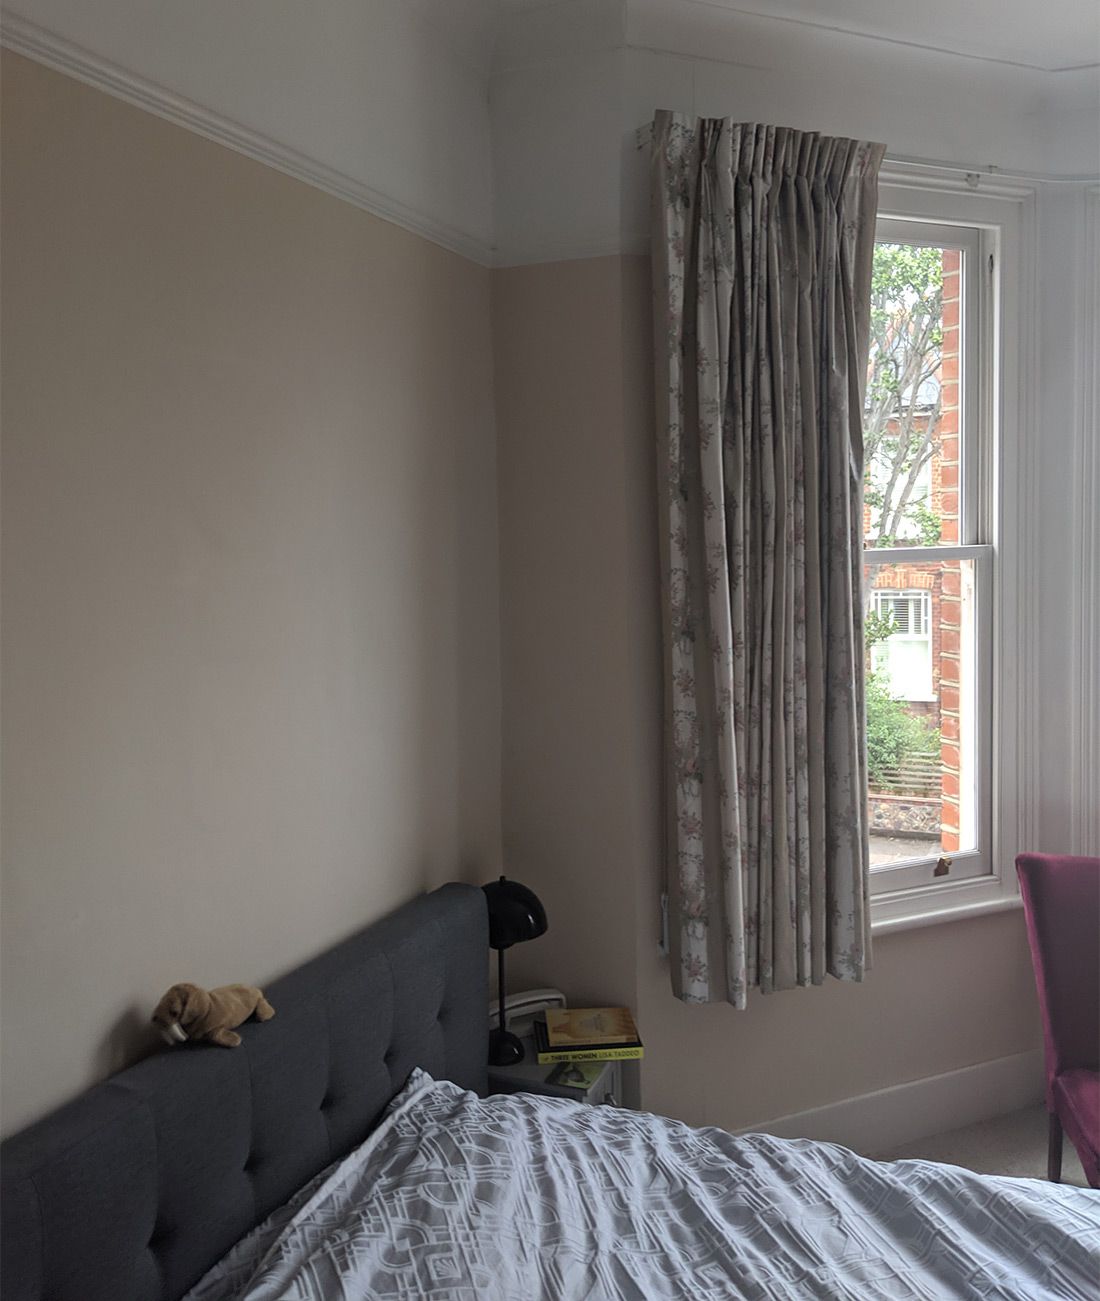 A view of the room showing the beige walls and too short curtains.